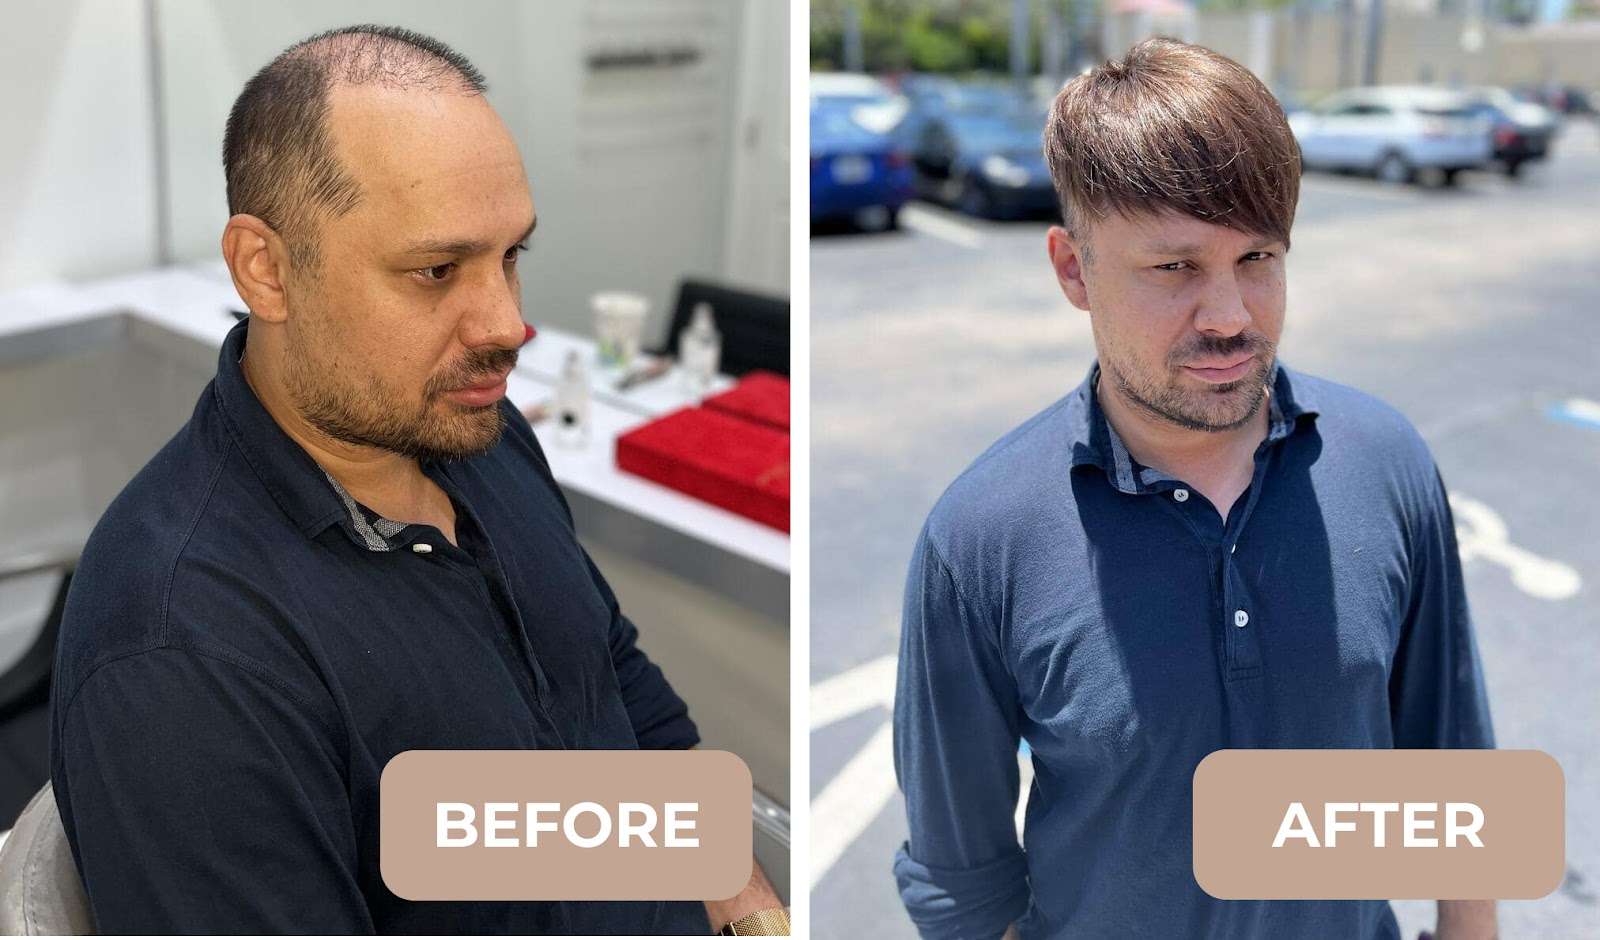 Hair replacement systems for men - a modern solution to alopecia